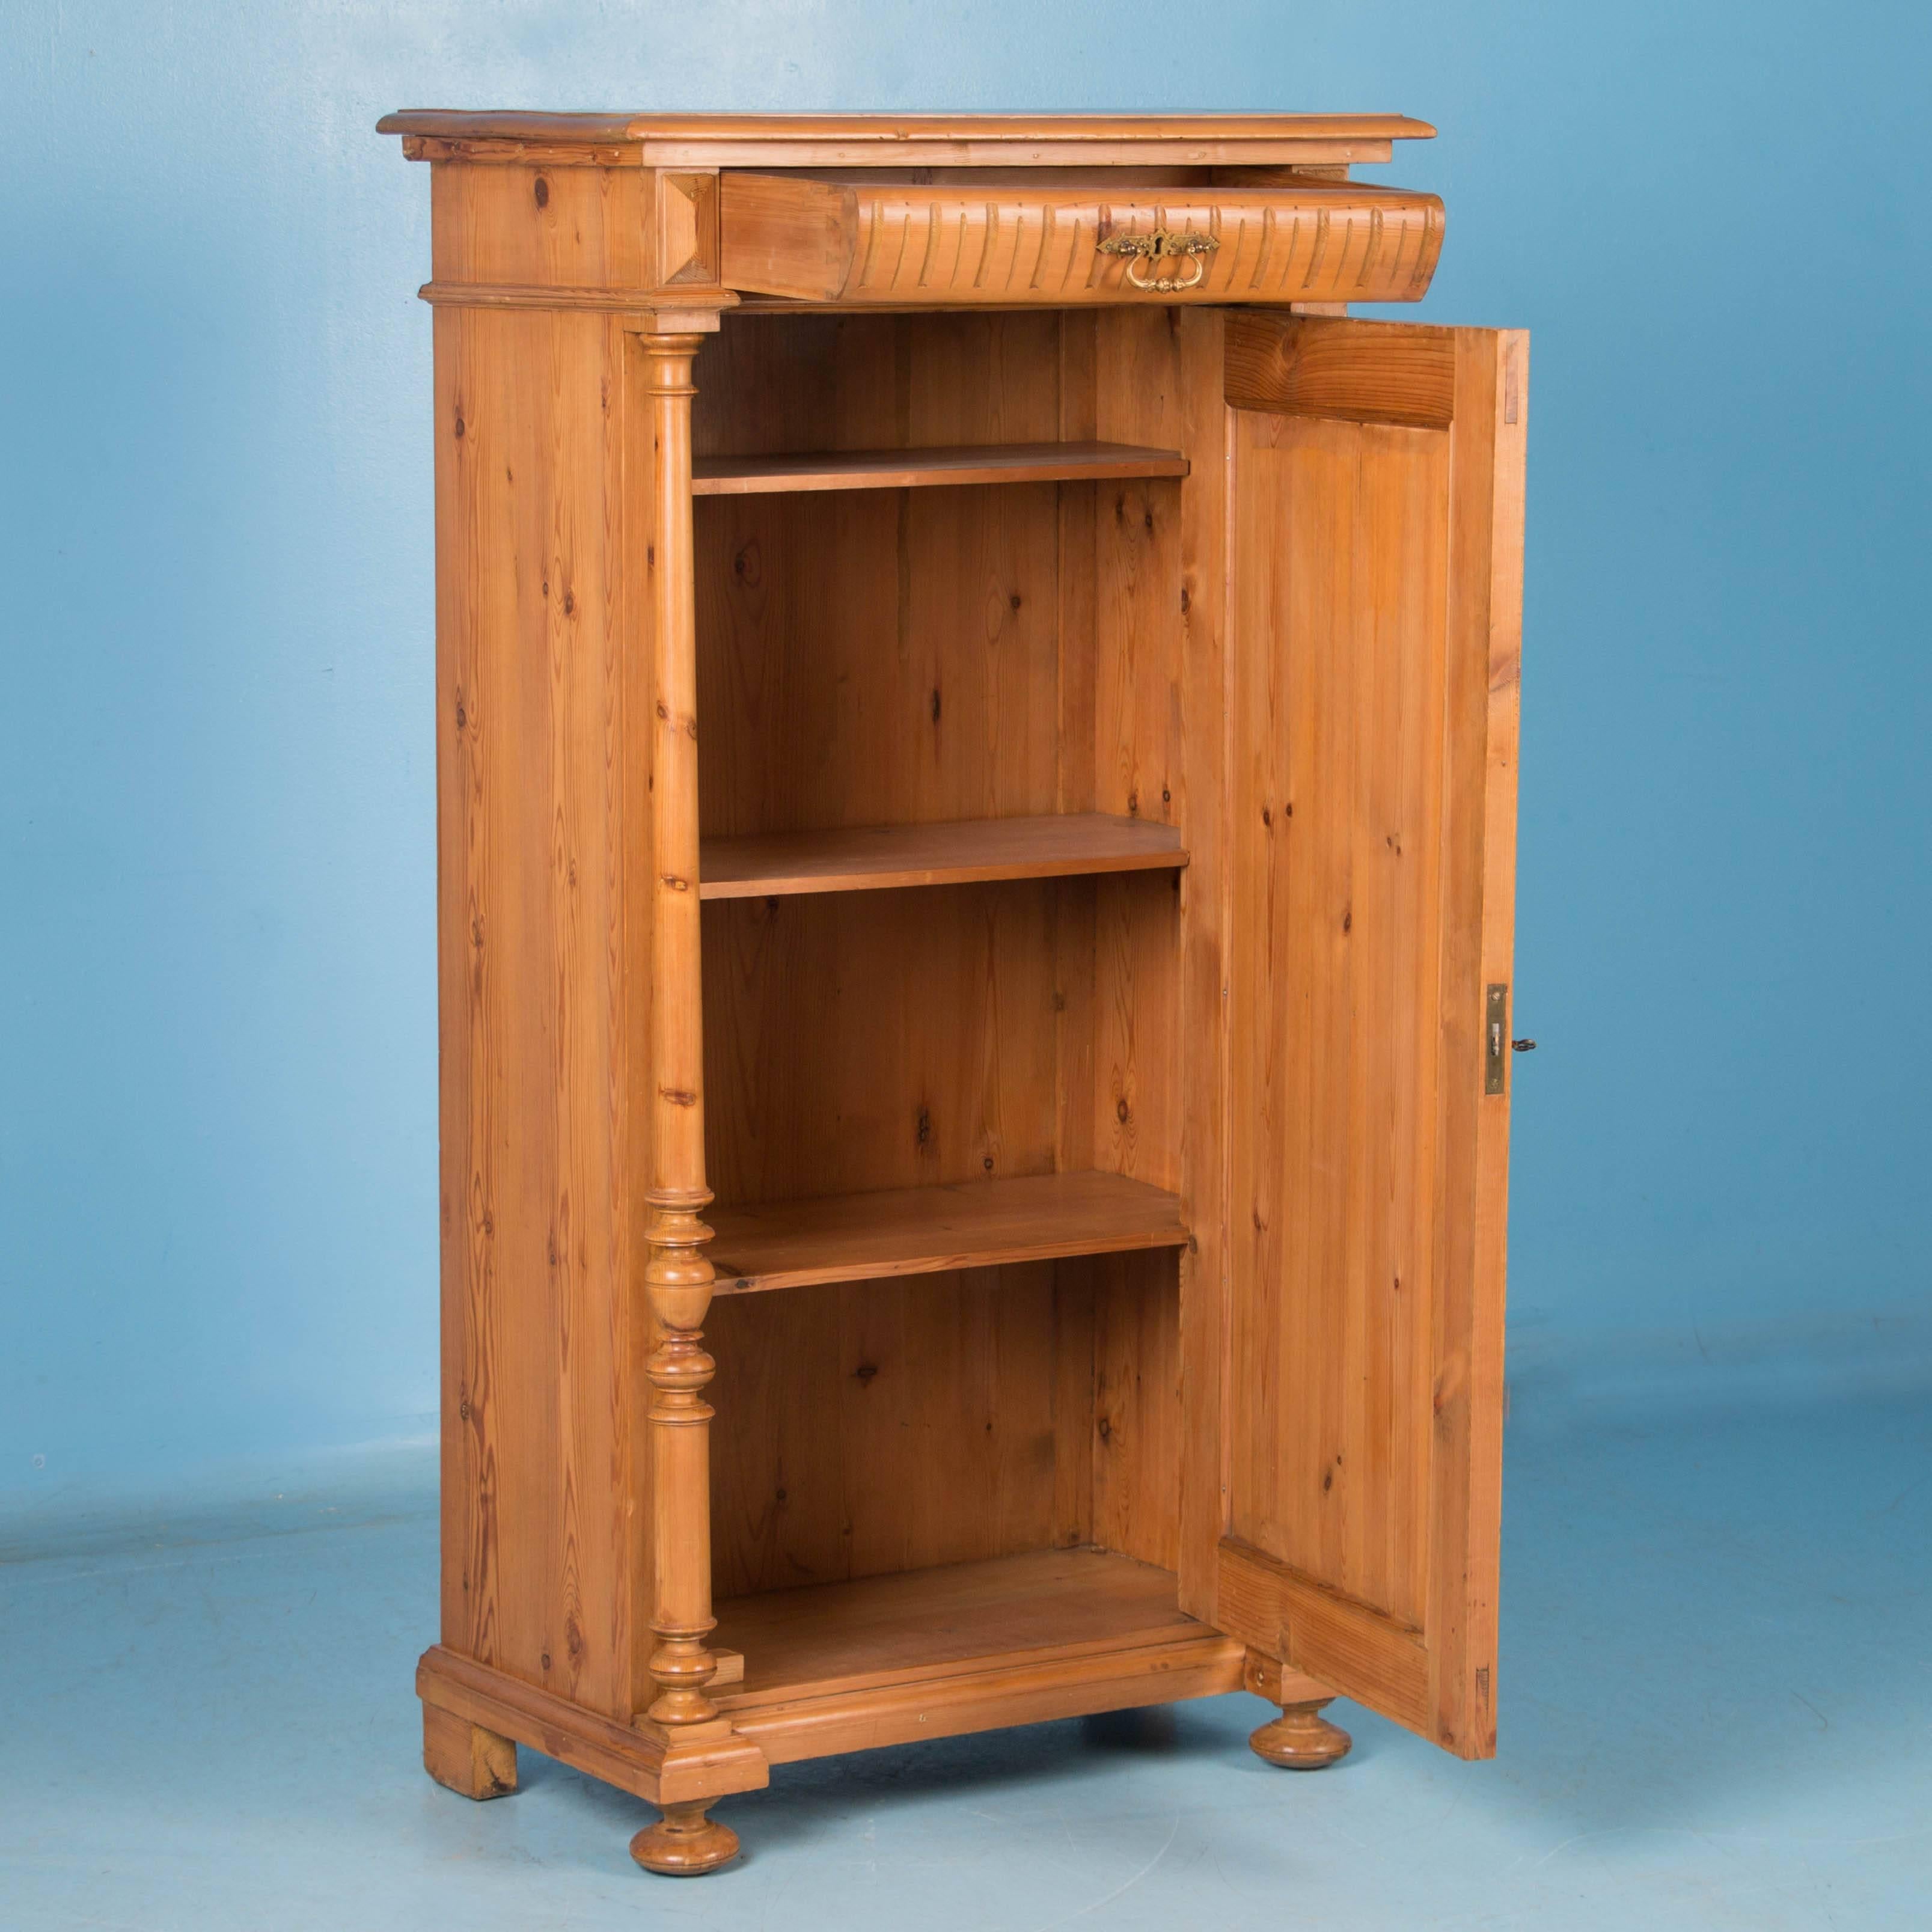  This pine armoire from Denmark radiates European country charm with it's turned column details and intricate carving in the panel door. The abbreviated height and narrow width offer versatility. It has been given a wax finish, bringing out the